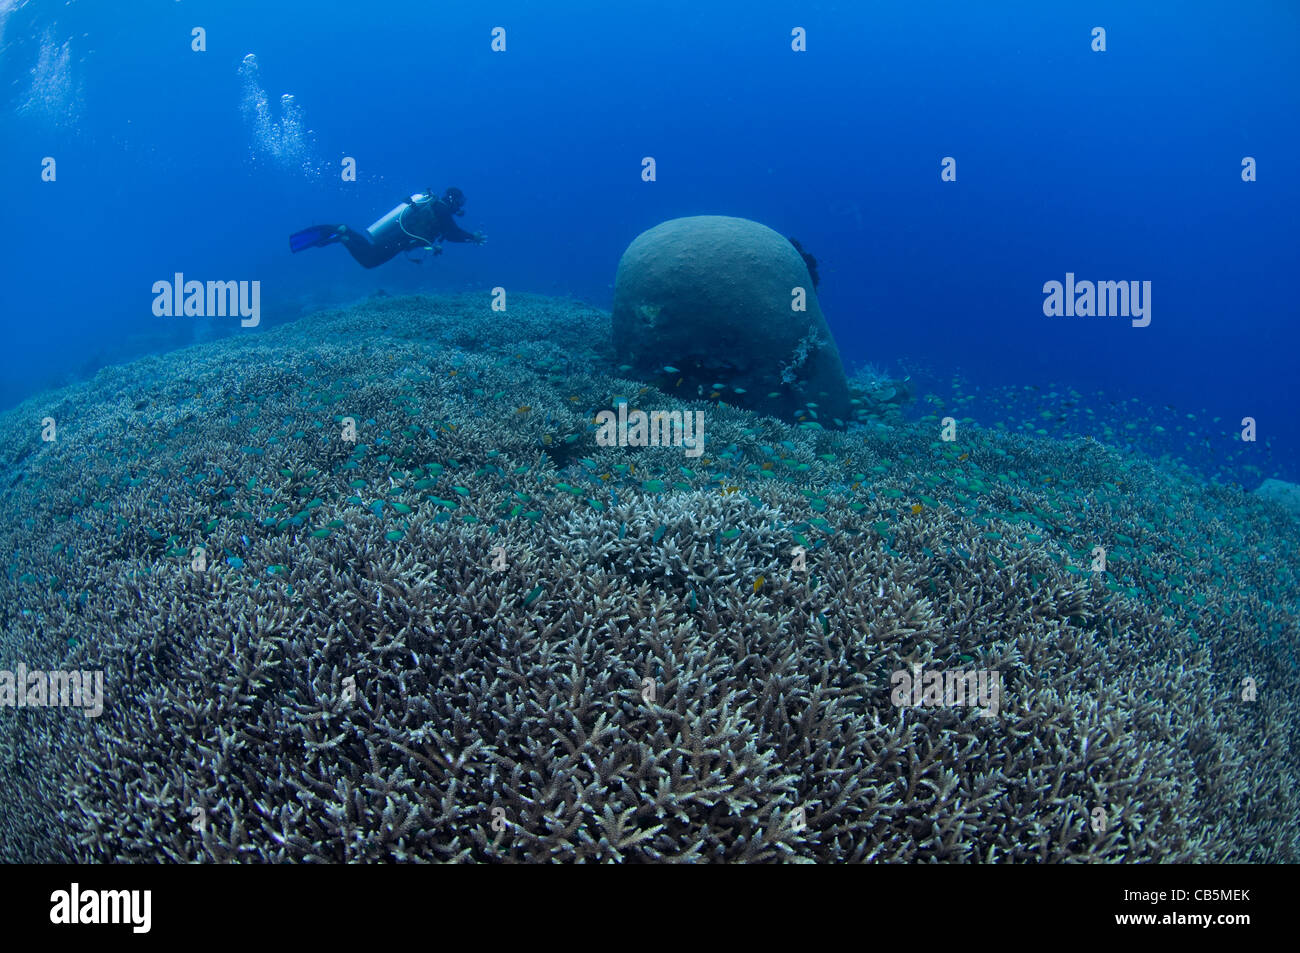 A diver inspects a hard coral garden, with a variety of table, leather, and staghorn corals, Lembeh Strait, North Sulawesi, Indo Stock Photo